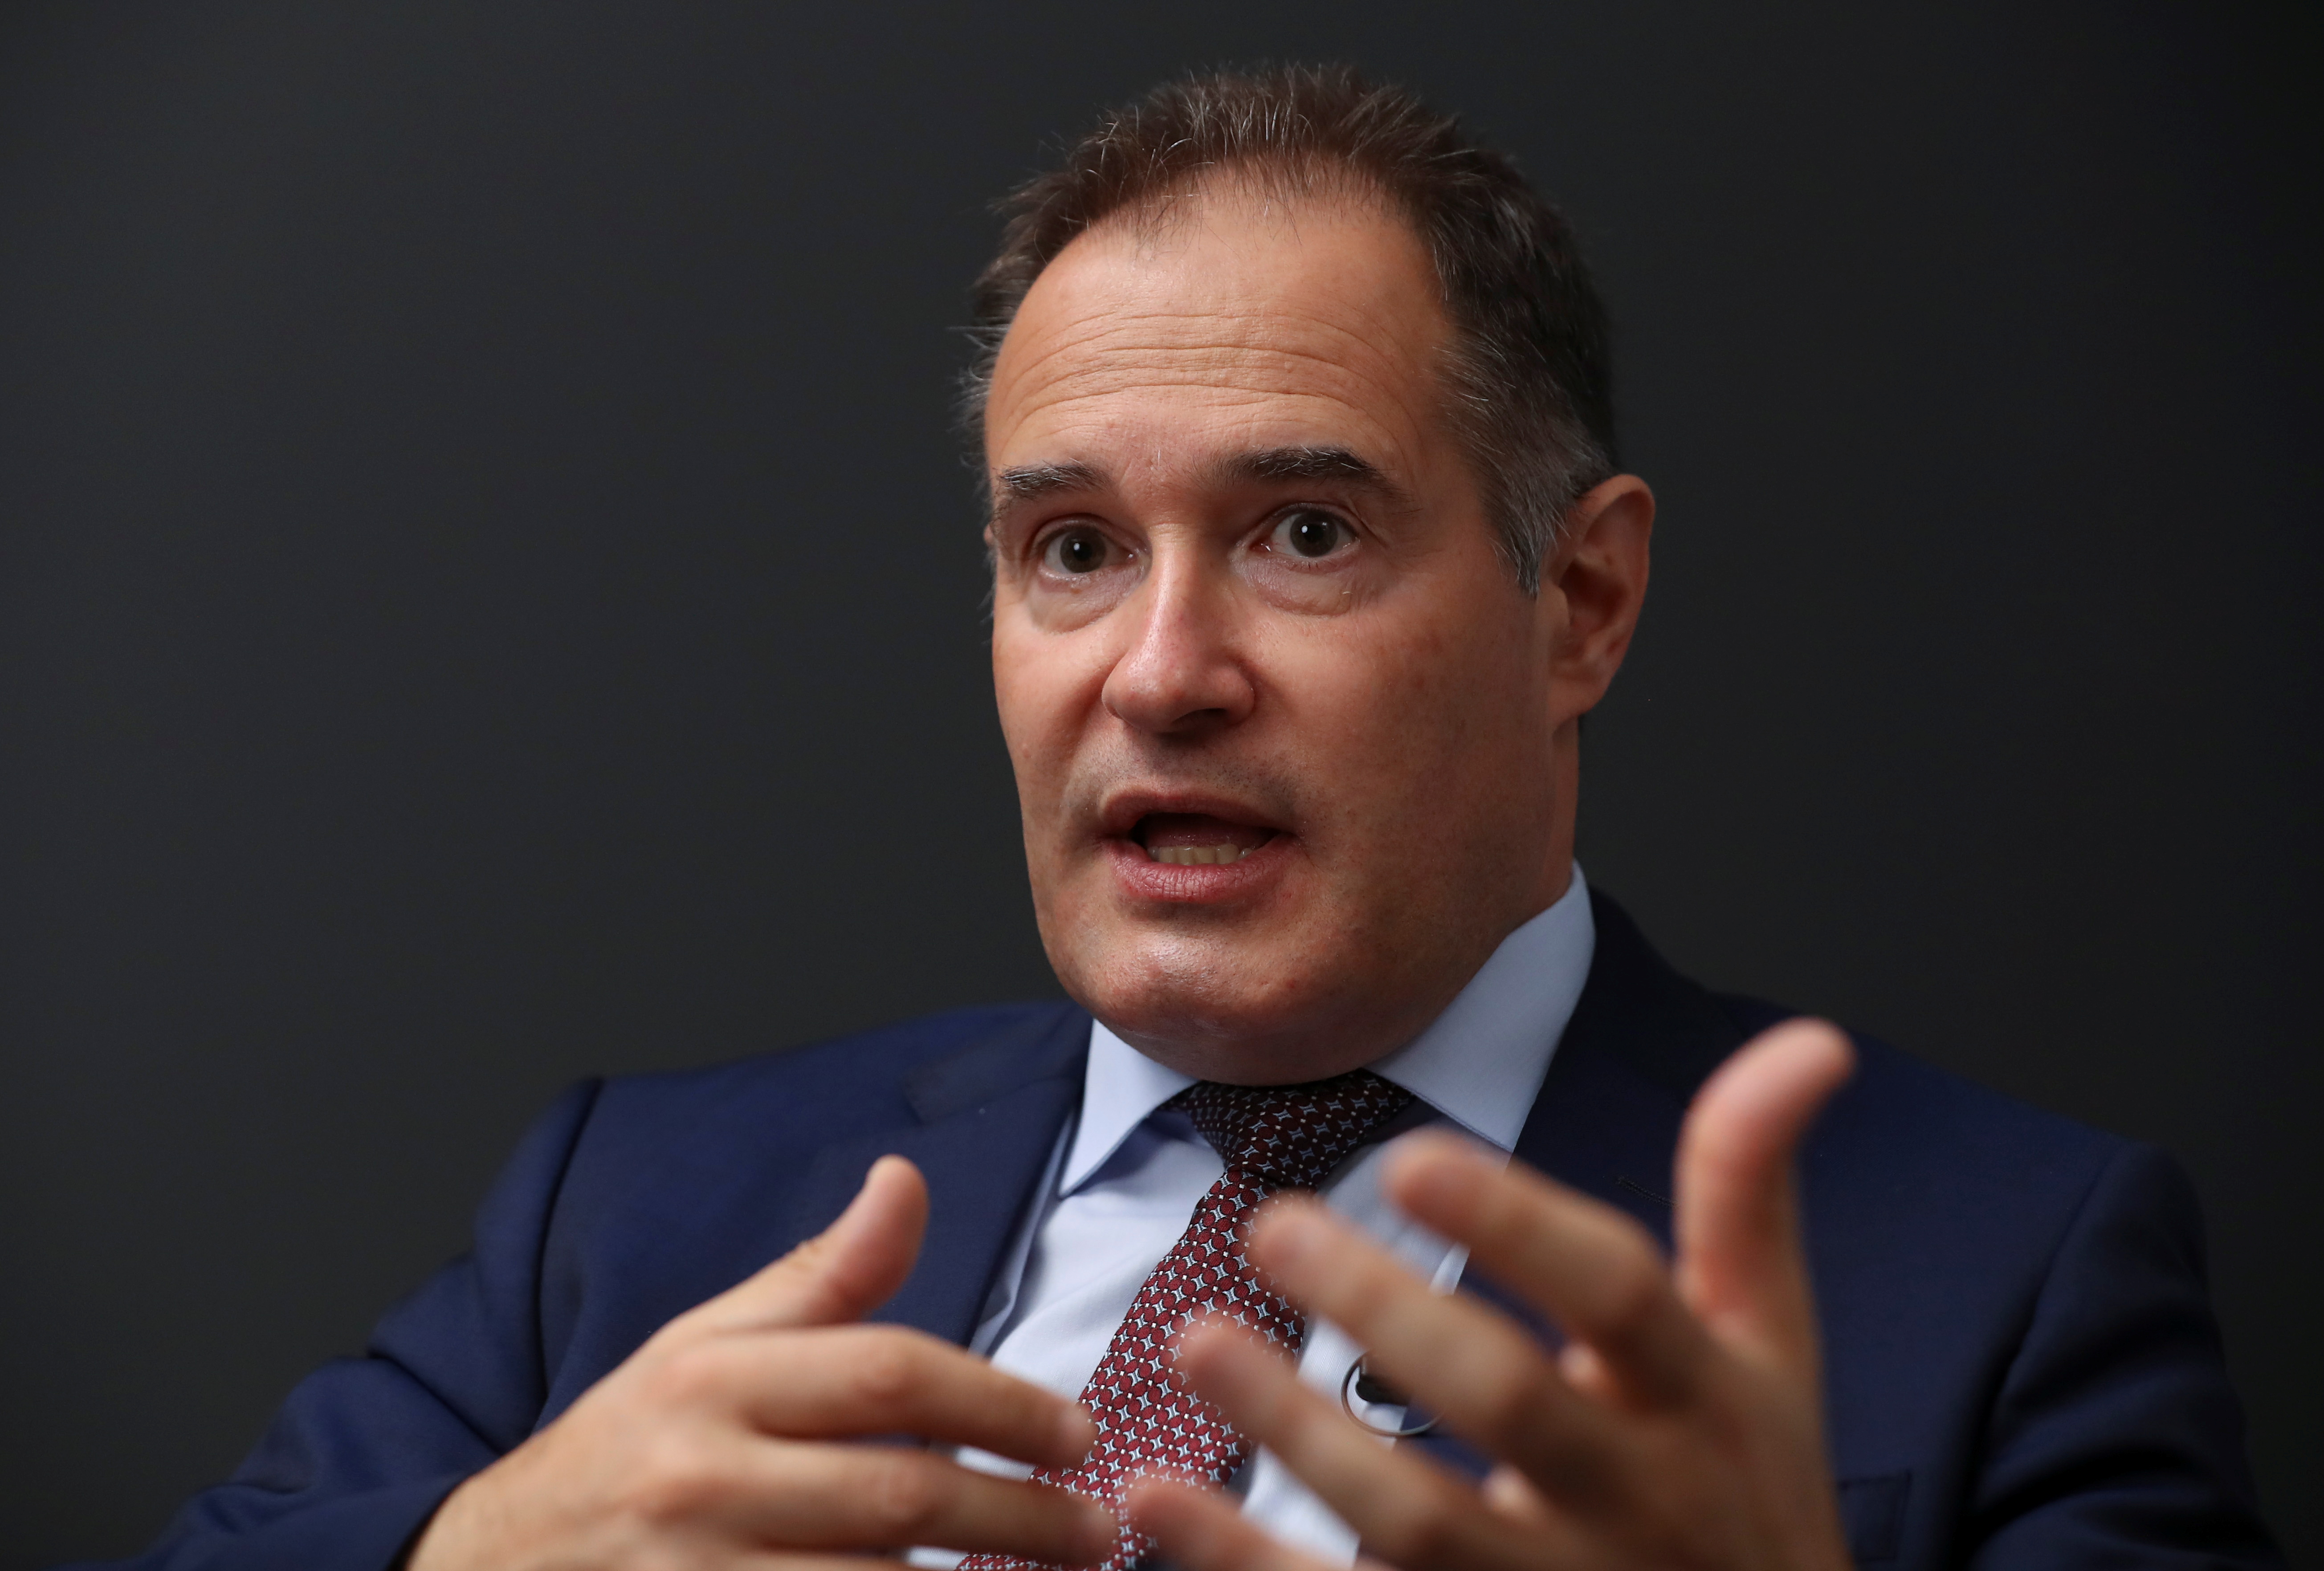 EU's Frontex Executive Director Leggeri speaks during an interview with Reuters in Warsaw